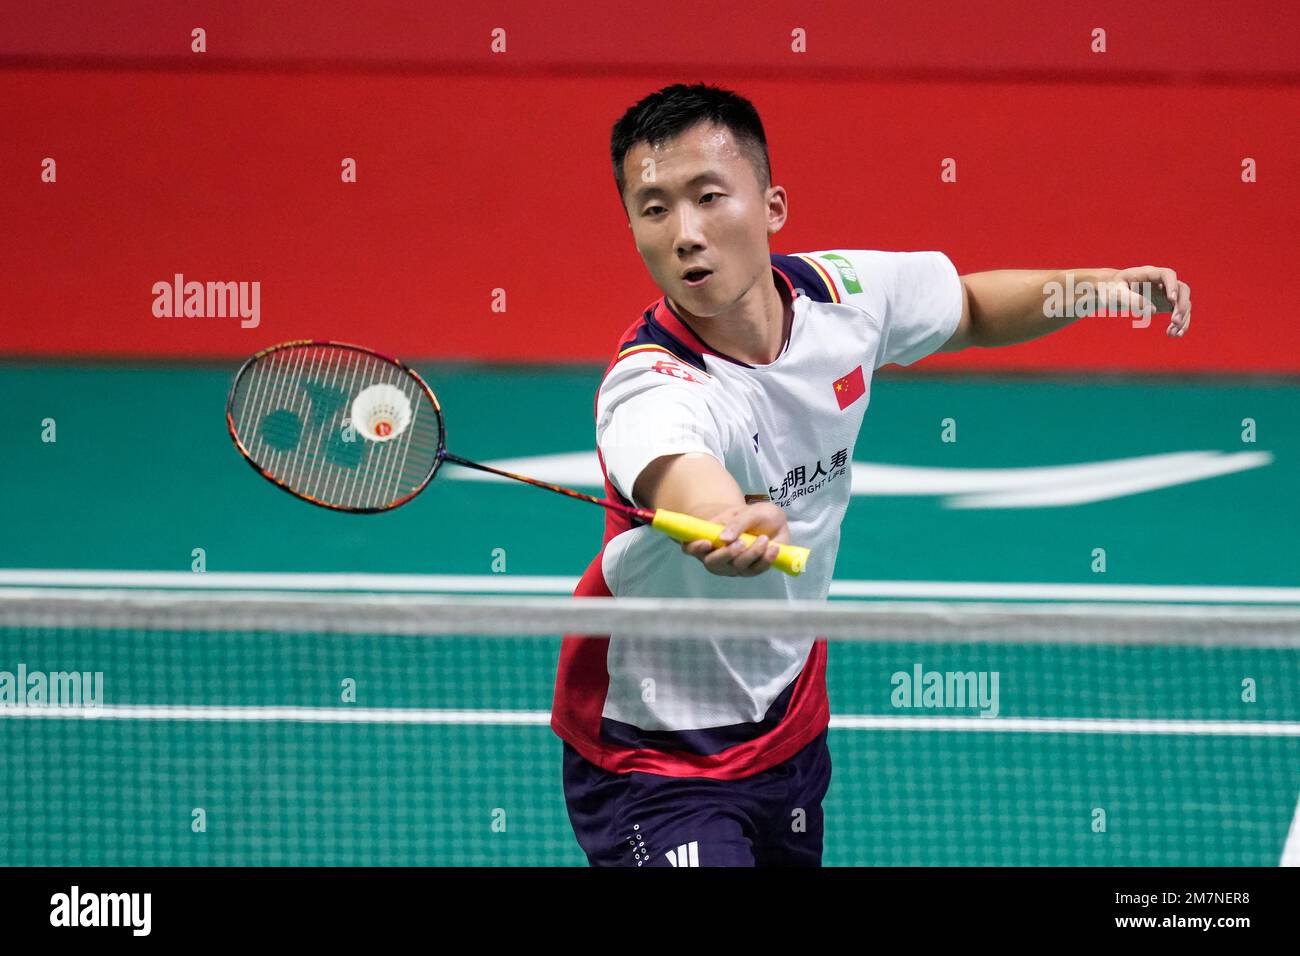 Chinas Lu Guangzu competes against Denmarks Viktor Axelsen during their mens singles Group A badminton match at the BWF World Tour Finals in Bangkok, Thailand, Wednesday, Dec